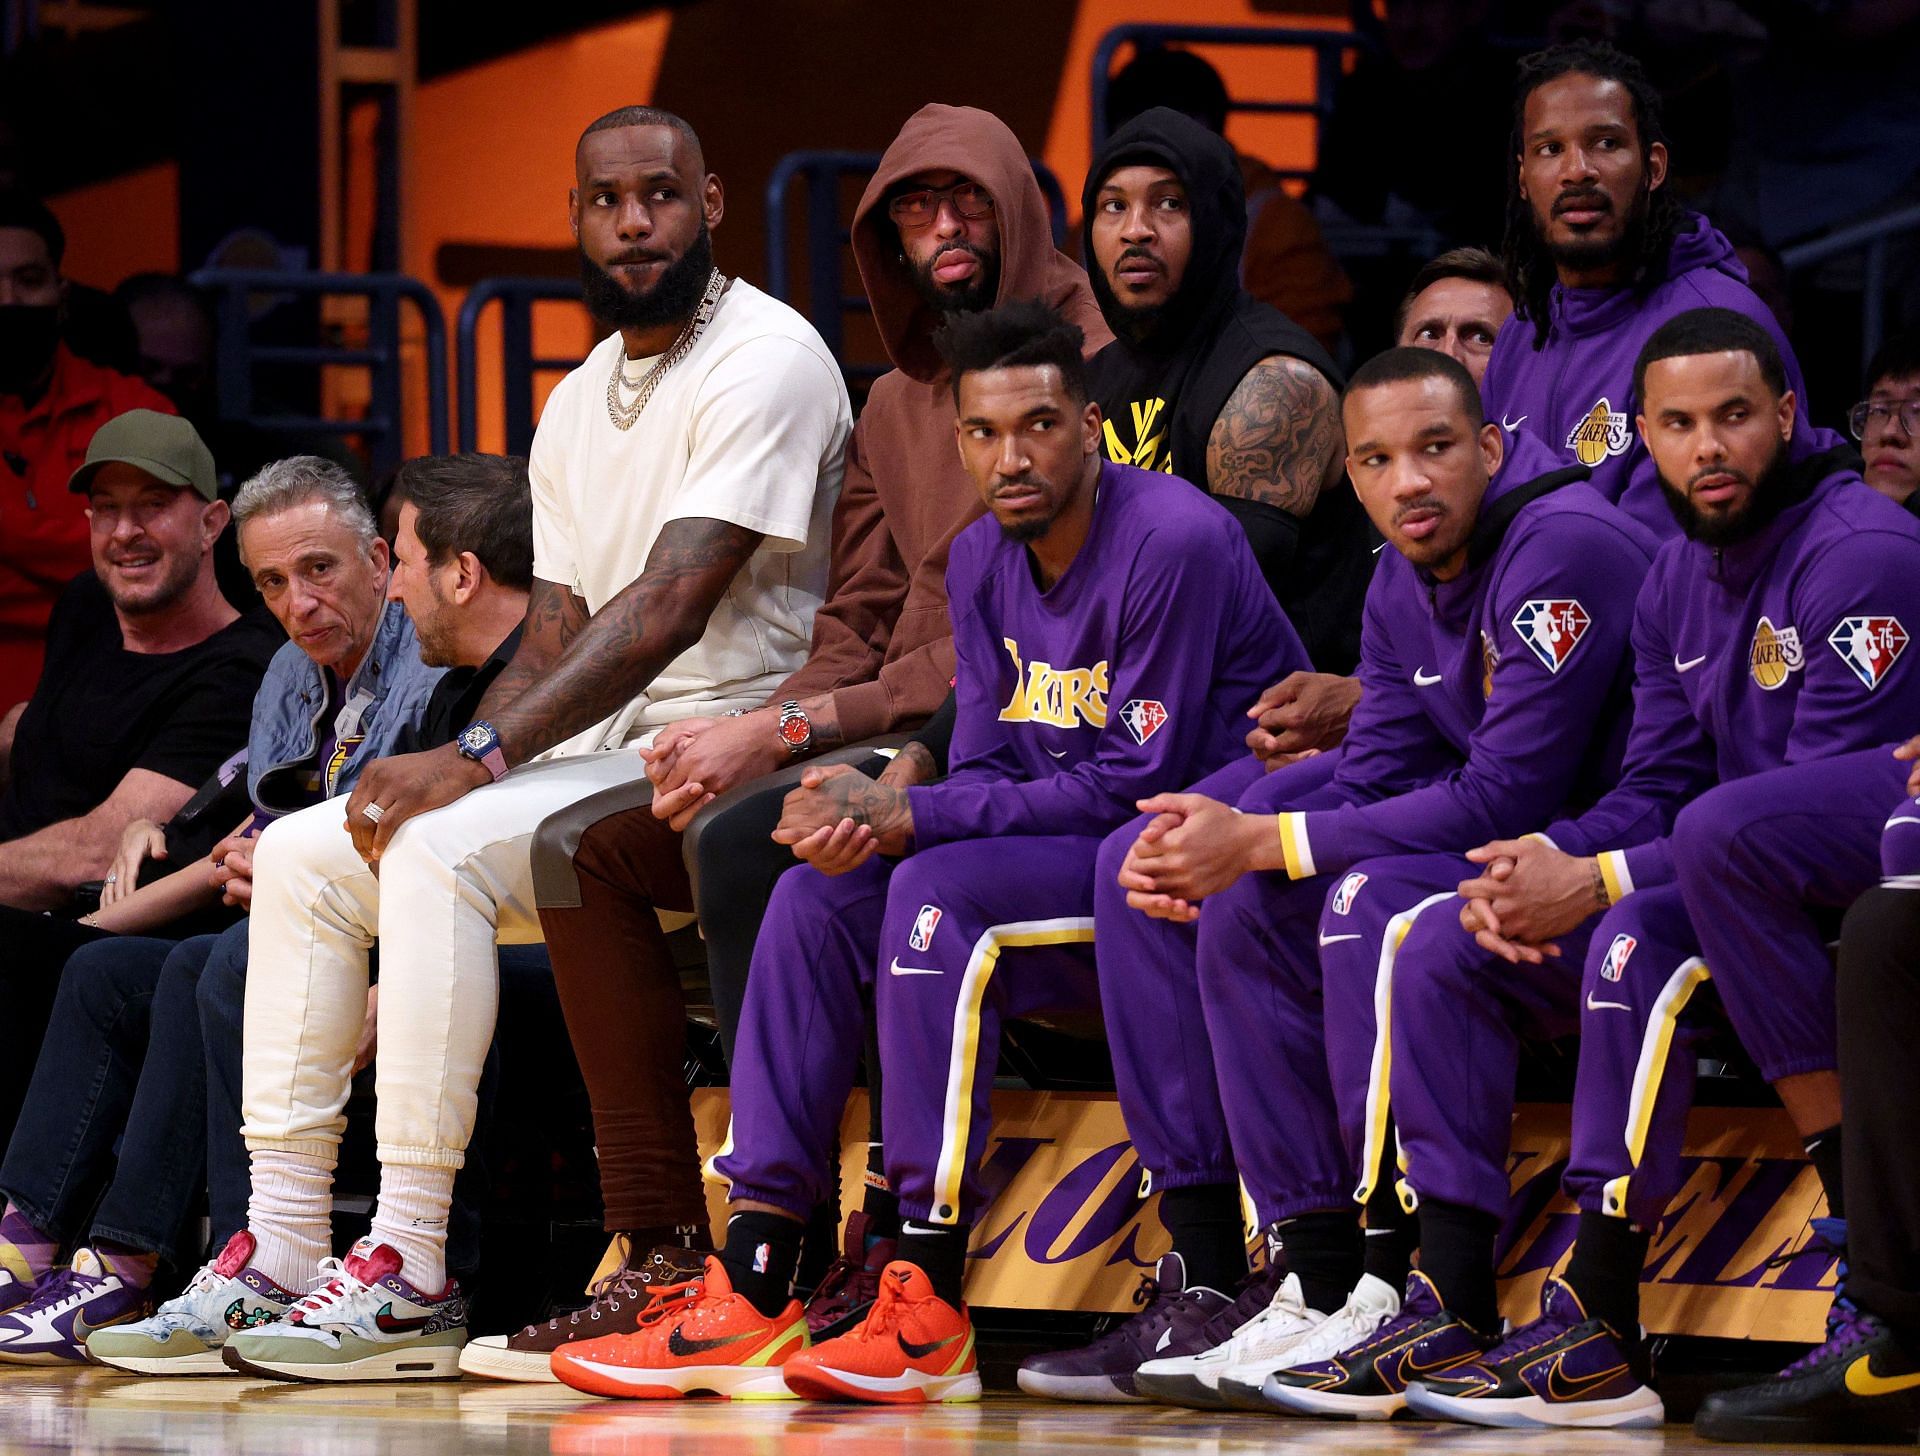 LeBron James at the bench in the Los Angeles Lakers game against the Philadelphia 76ers.